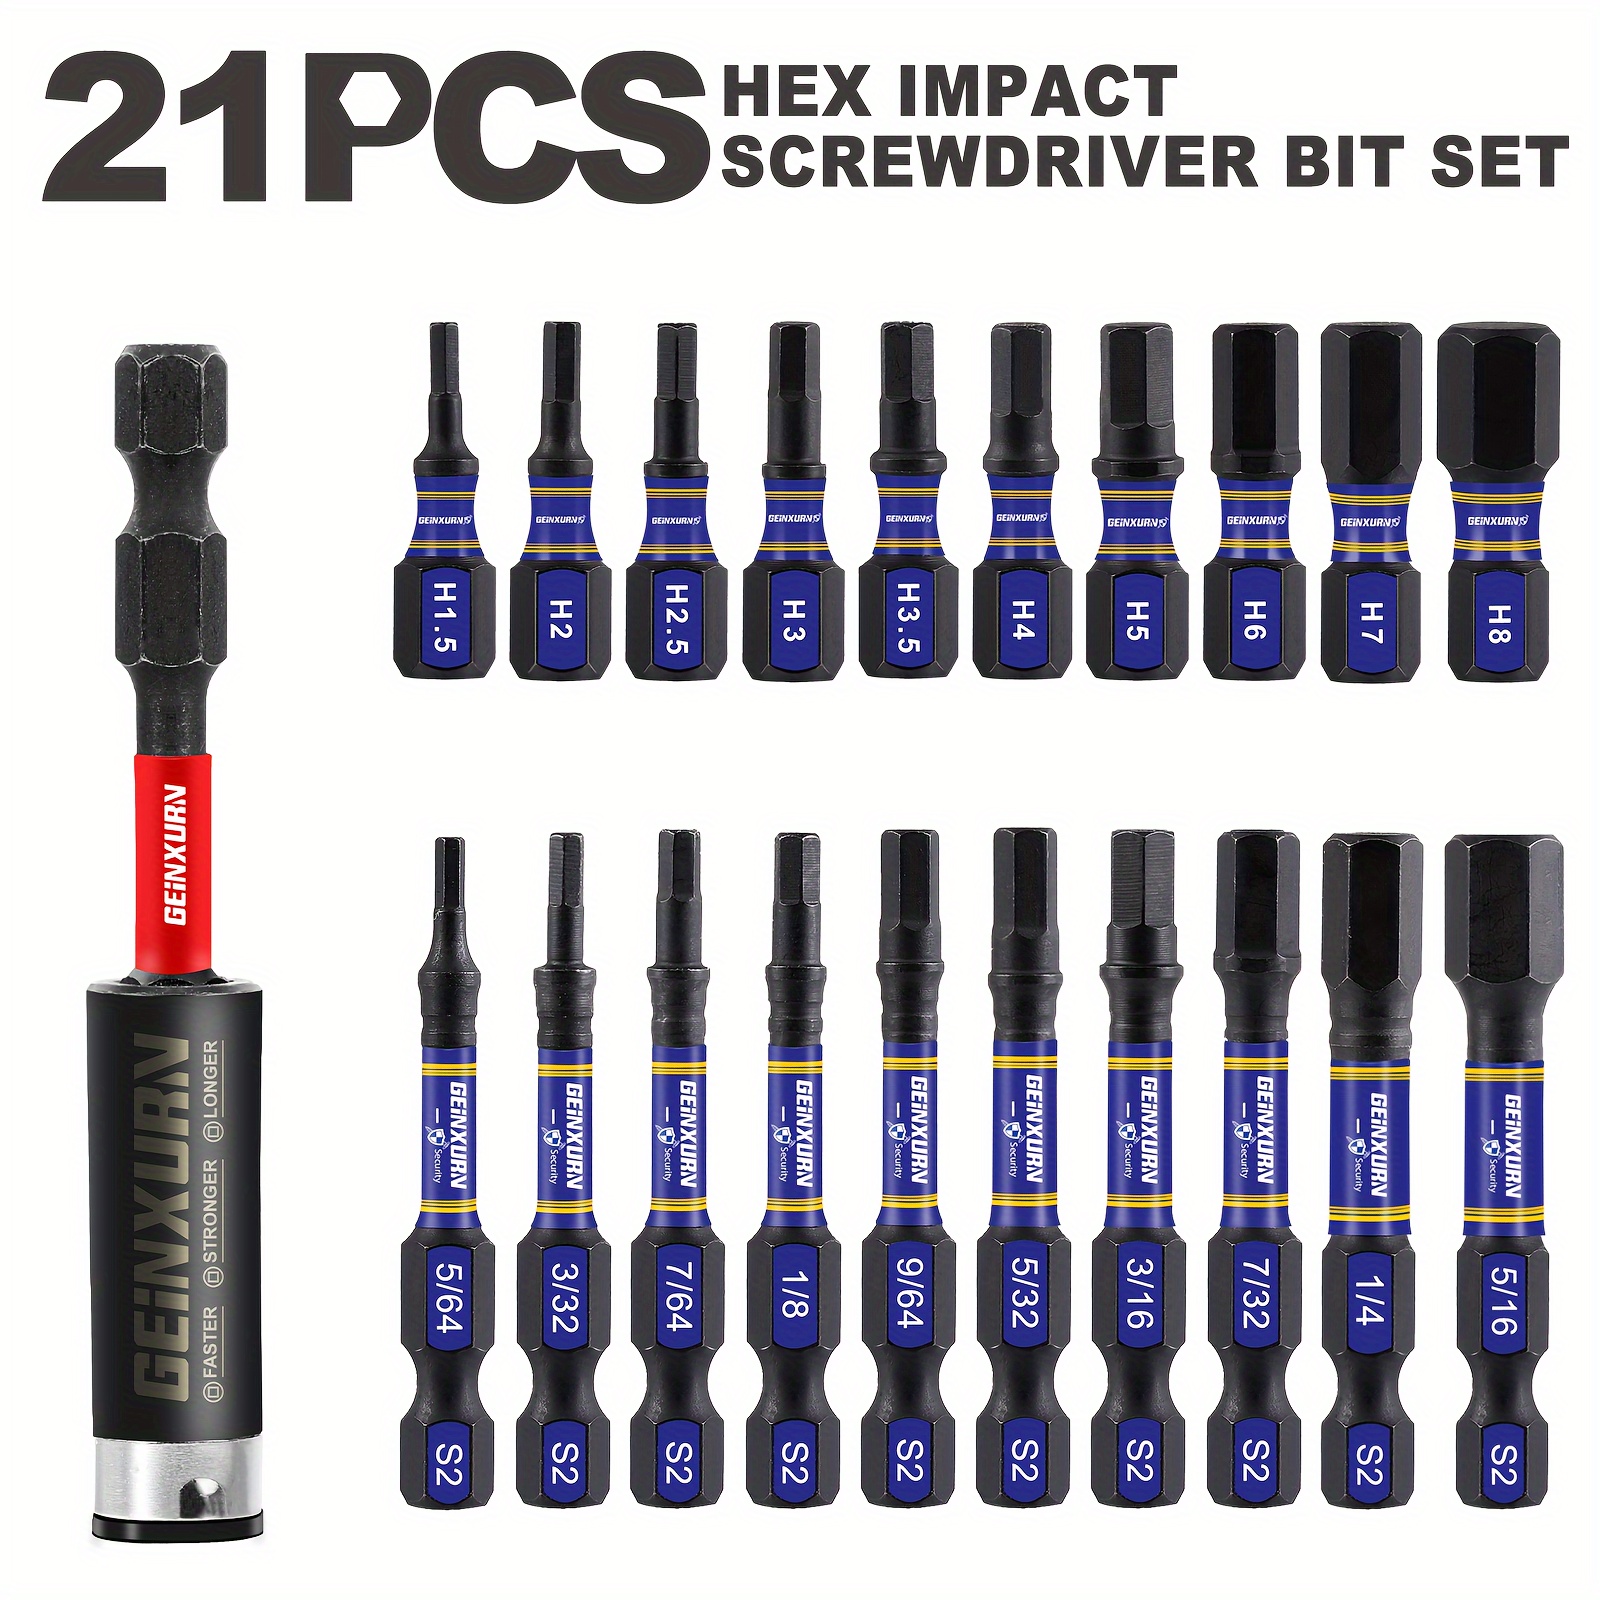 

Geinxurn 22-piece Hex Impact Driver Bit Set - Includes 10 Metric & 10 Imperial Sizes (1"-6") With Holders, Durable S2 Steel, Precision Machined Tips For Superior Grip